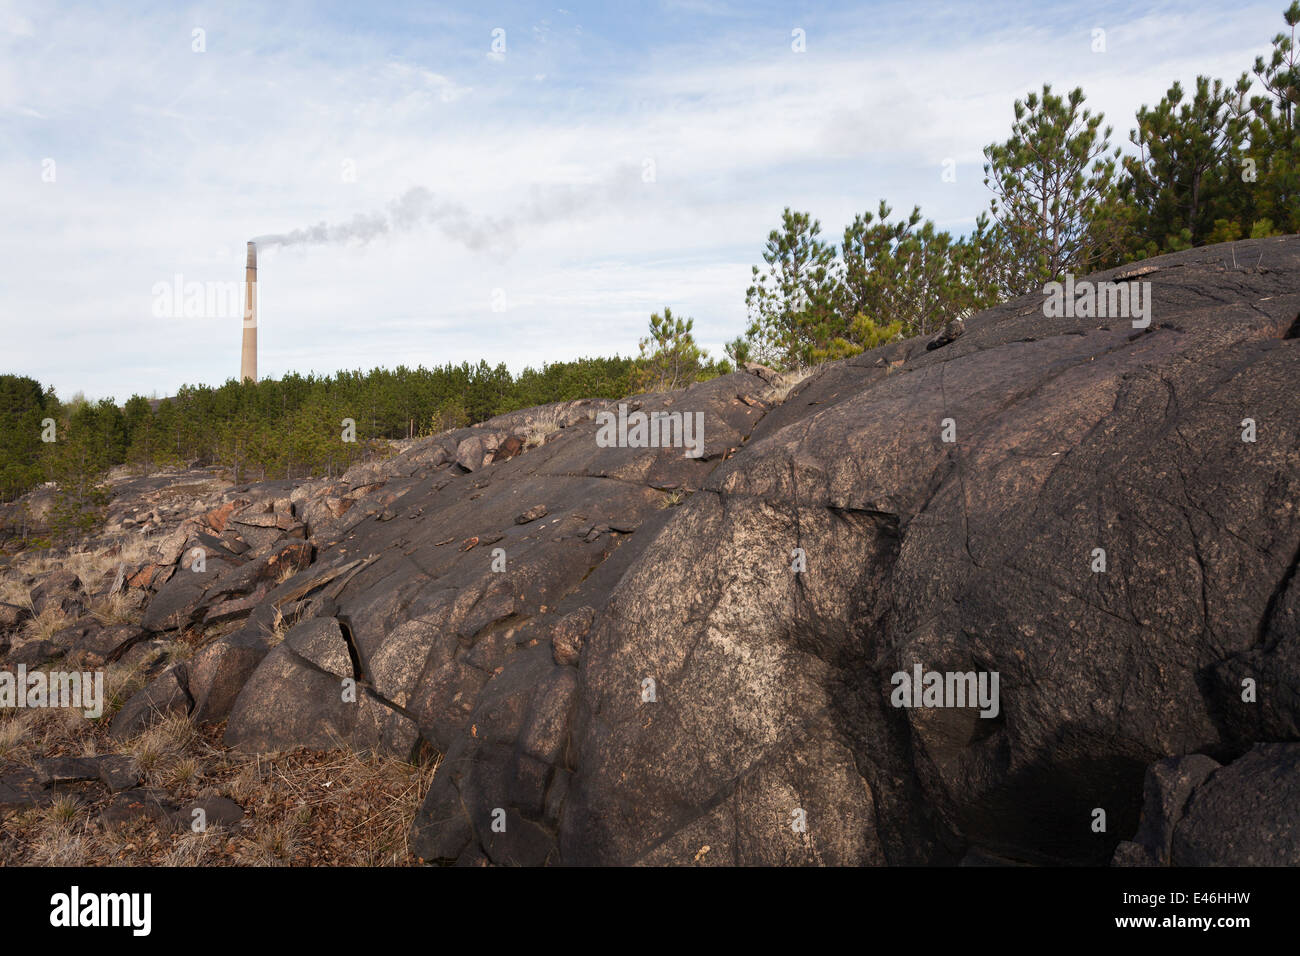 Pollution has blackened exposed rock in Sudbury near the Vale Mining operations. The Superstack can be seen in the distance. Stock Photo